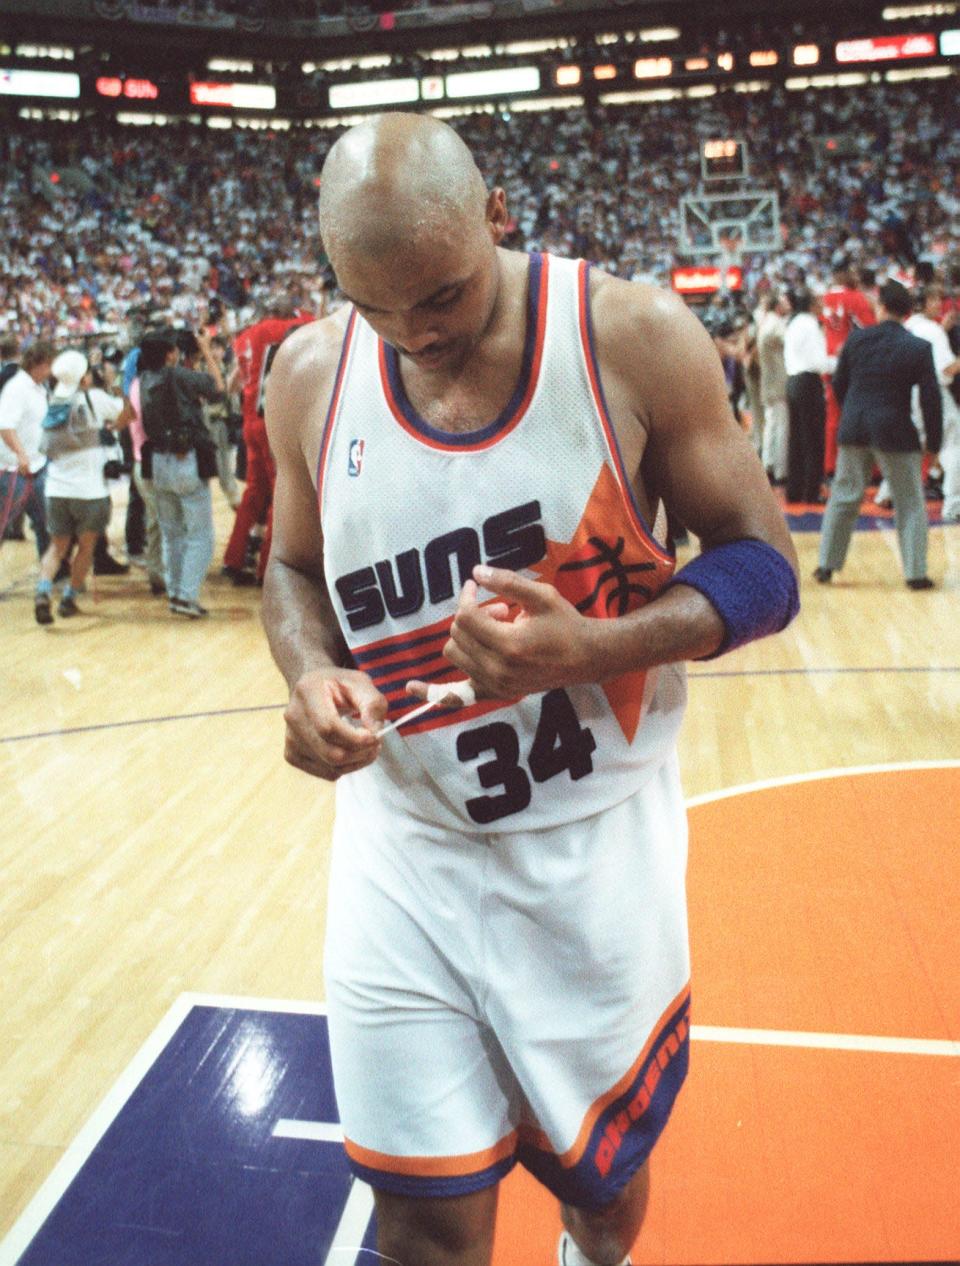 Phoenix Suns' Charles Barkley walks off the court as the Chicago Bulls celebrate in the back ground after winning Game 6 of the 1993 NBA Finals in Phoenix.